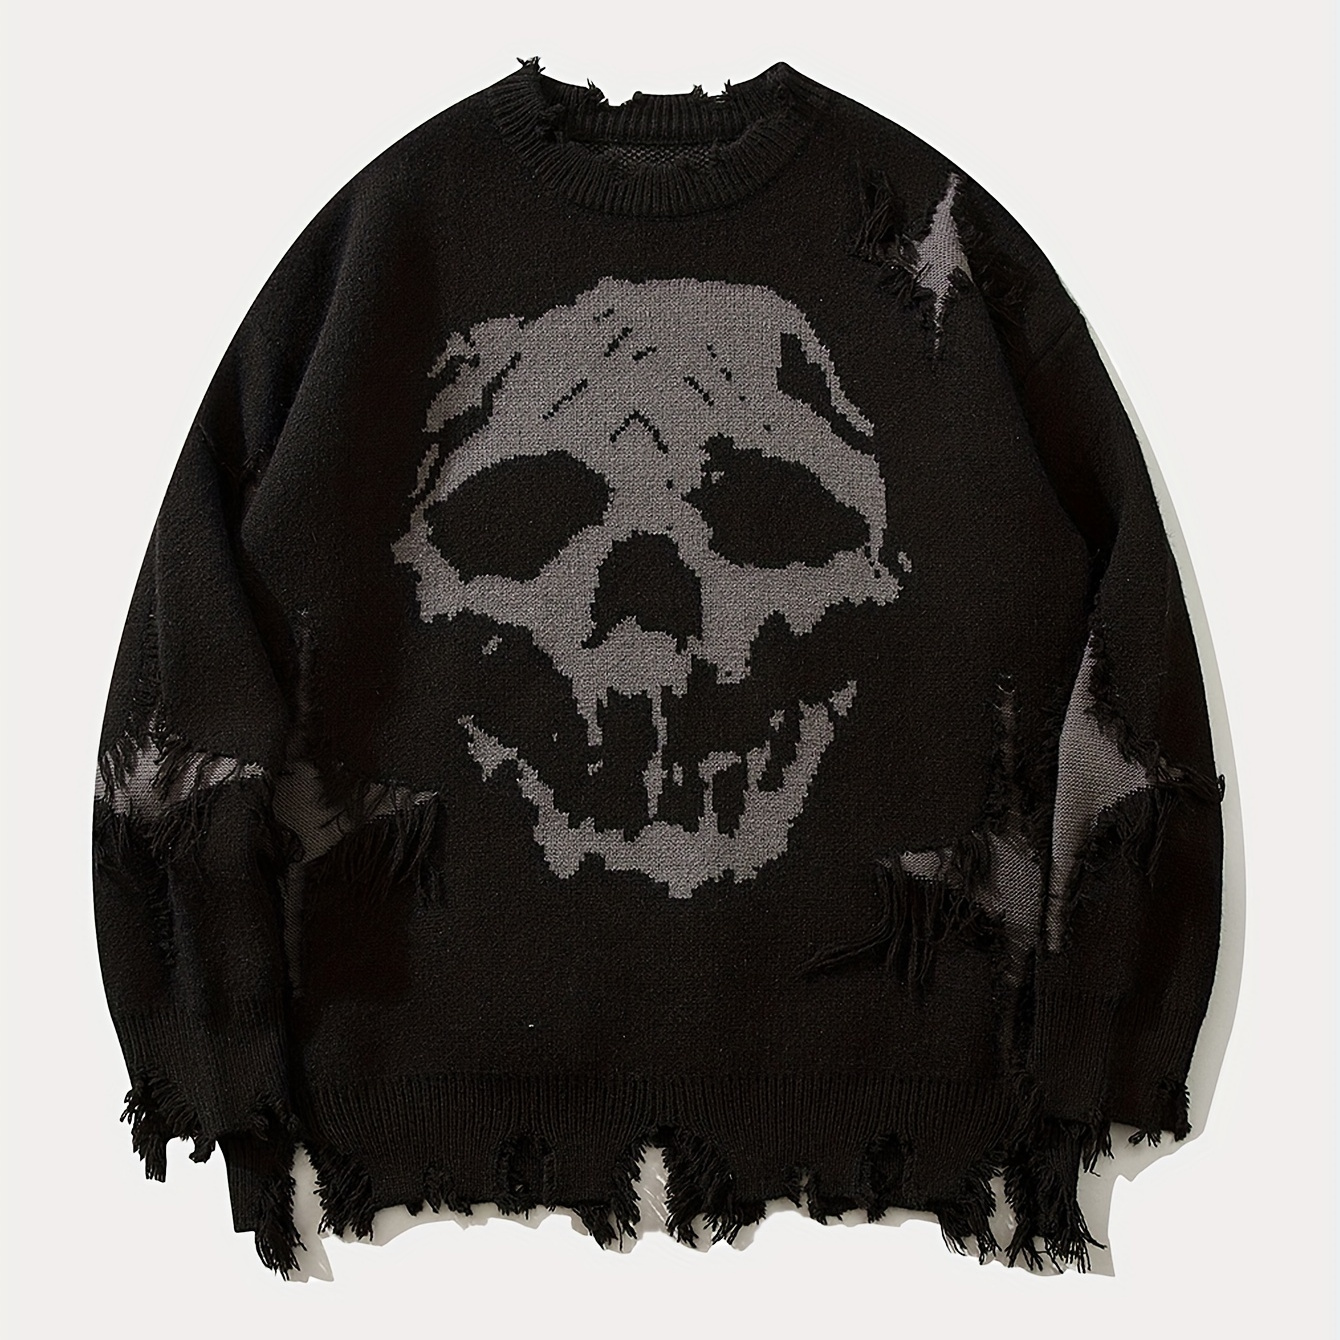 

Men's Stylish Skull Pattern Knitted Pullover, Casual Breathable Long Sleeve Crew Neck Top For City Walk Street Hanging Outdoor Activities